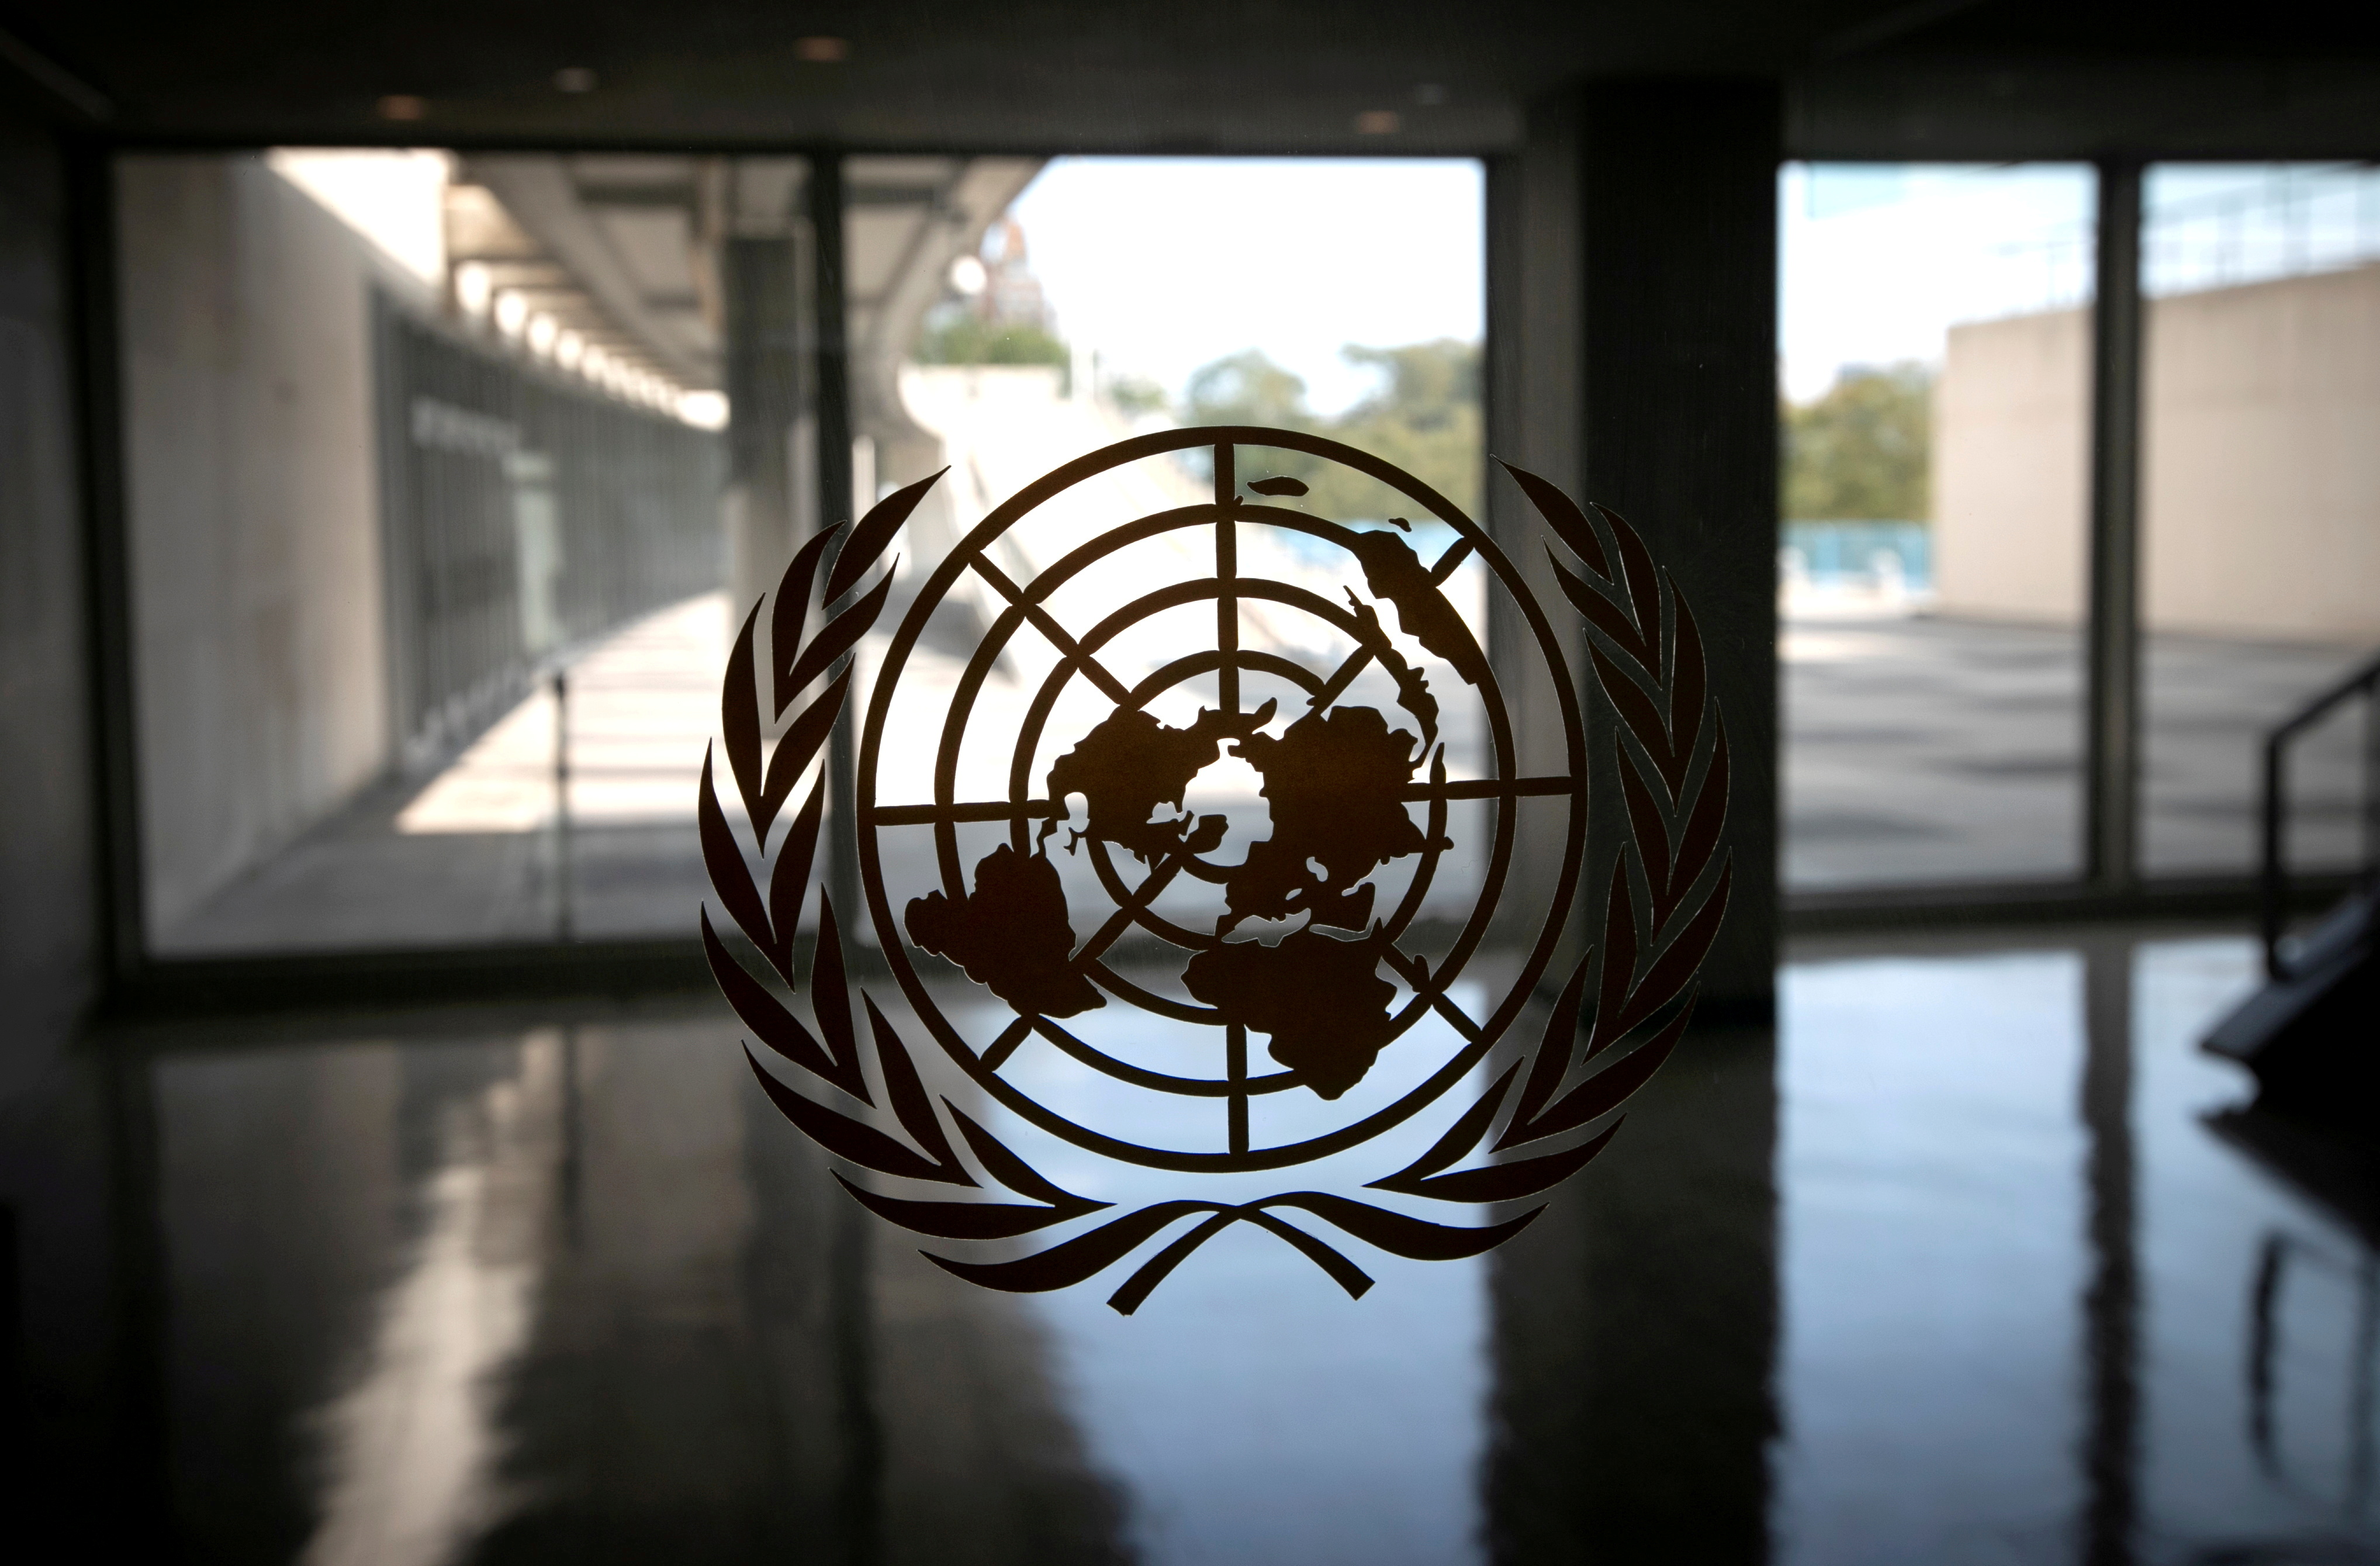 The United Nations logo is seen on a window in an empty hallway at United Nations headquarters